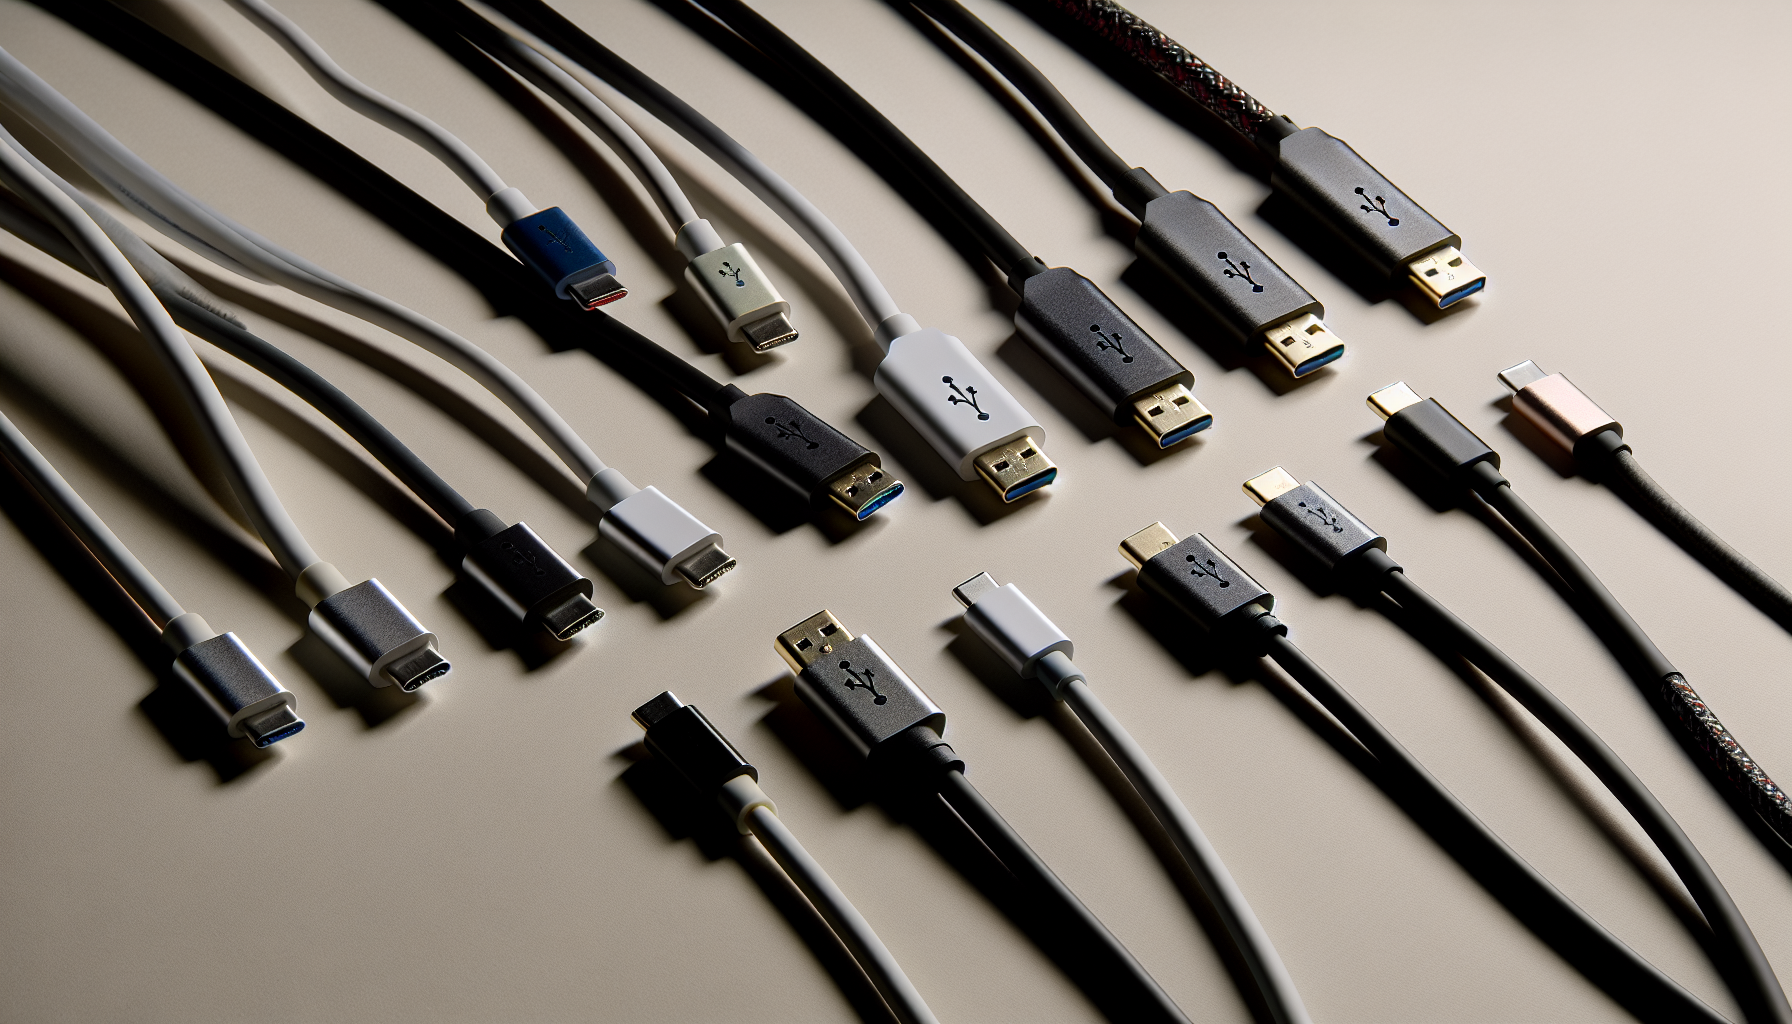 A collection of USB-C cables with different certifications